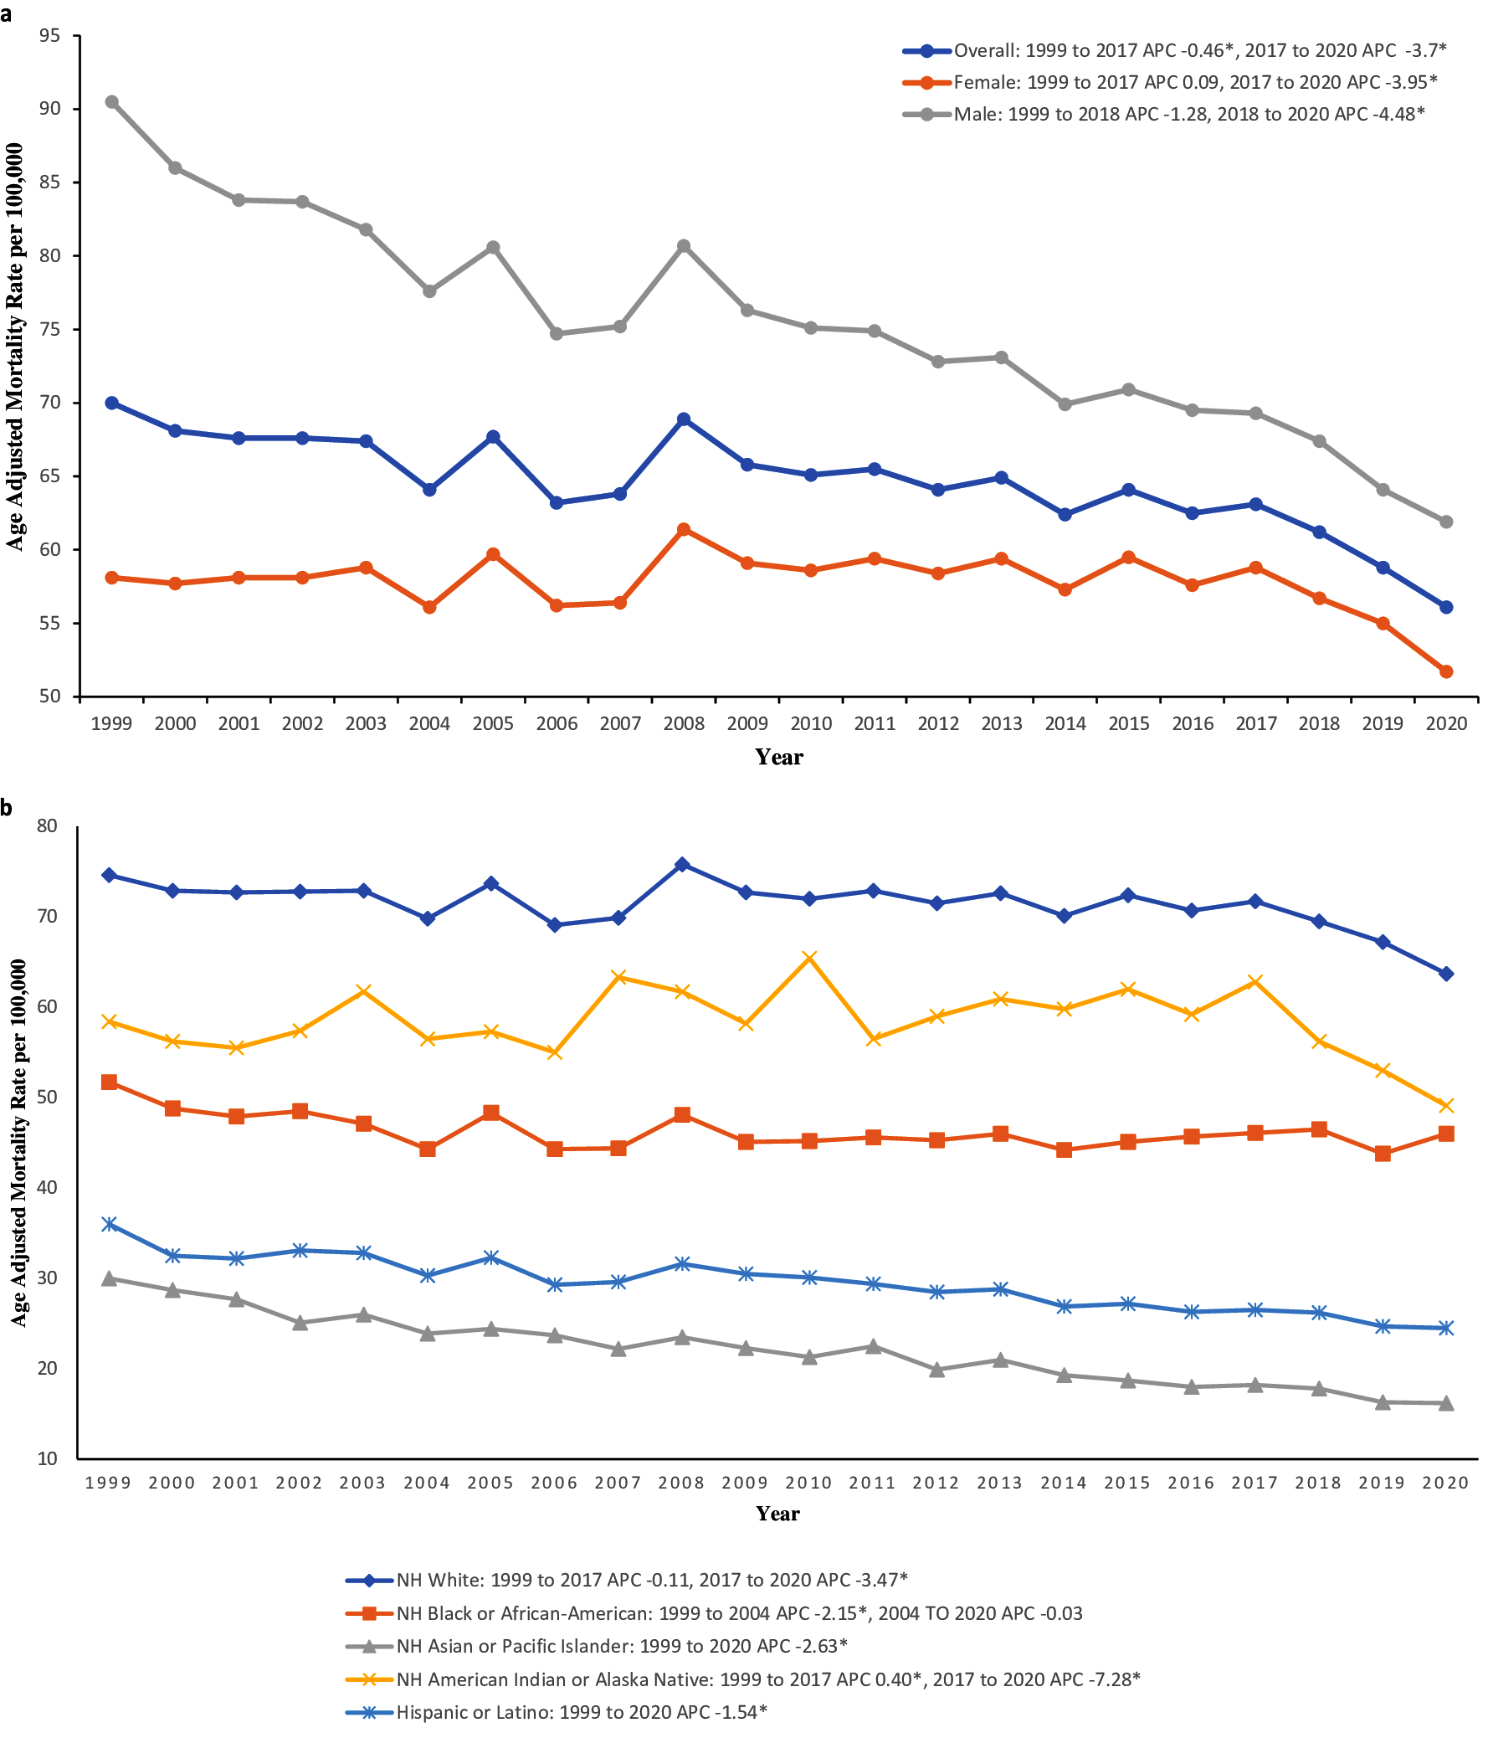 Demographic and geographical trends in chronic lower respiratory diseases mortality in the United States, 1999 to 2020